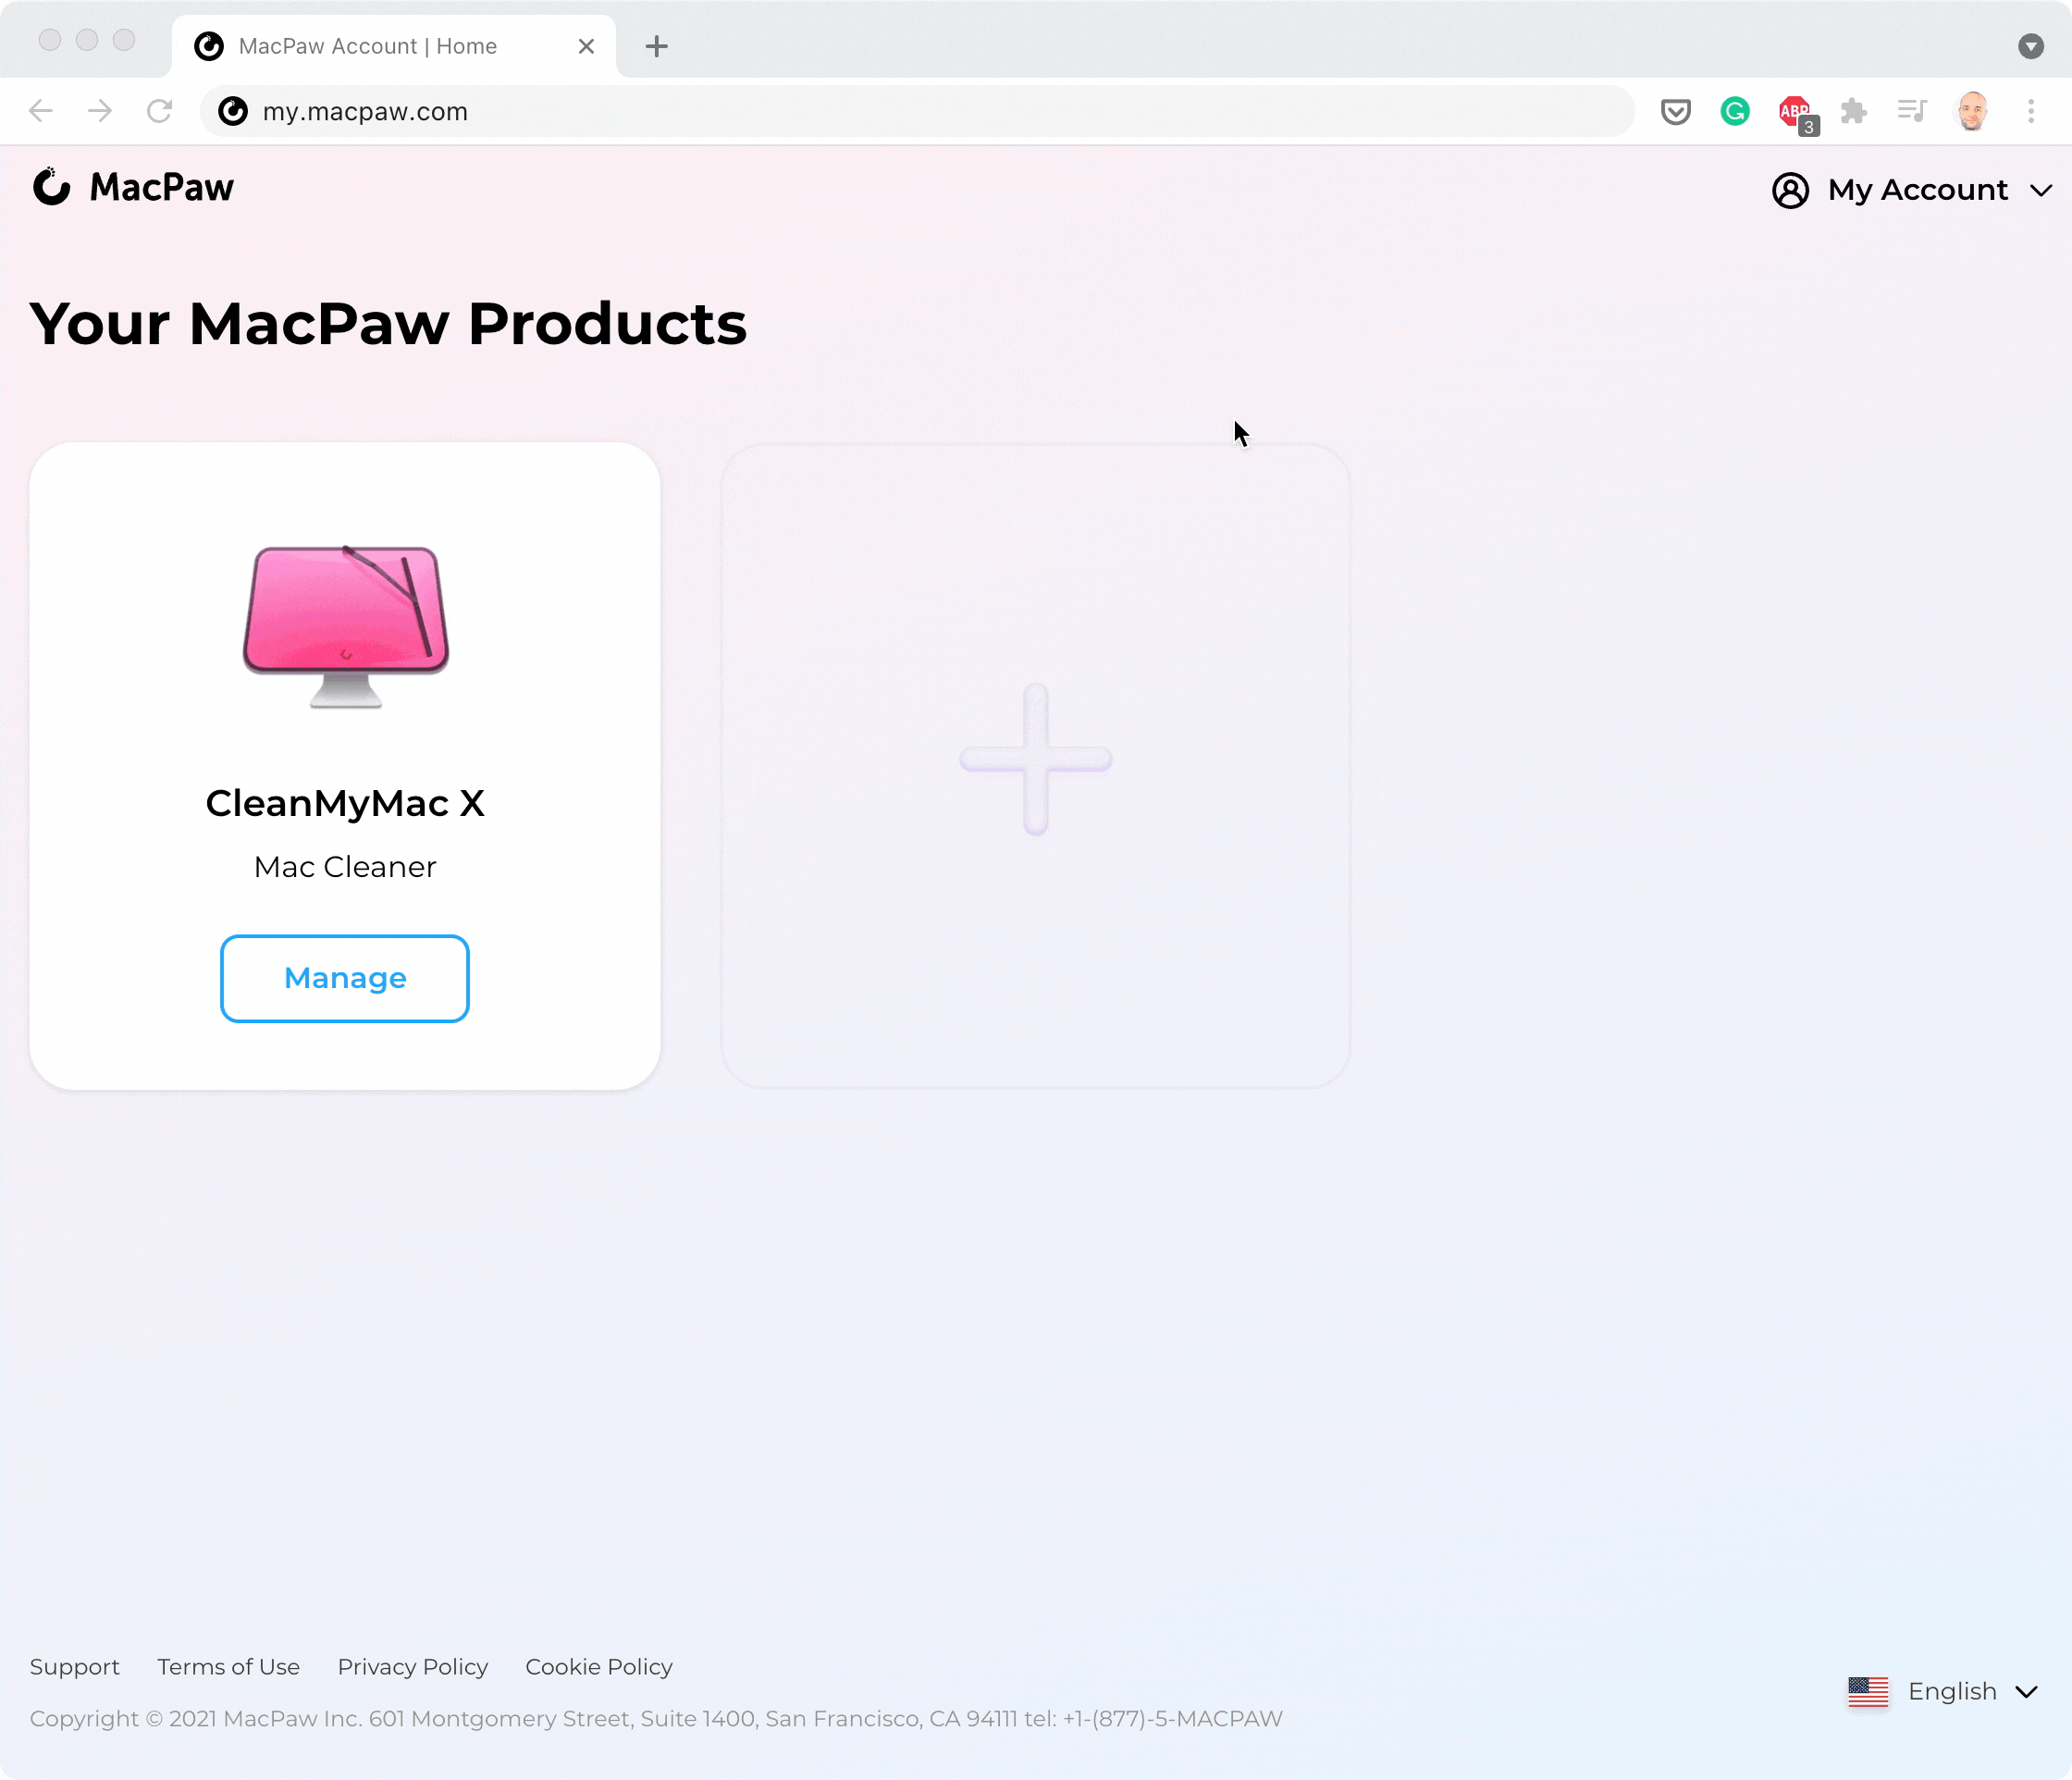 Claim discount in your MacPaw account